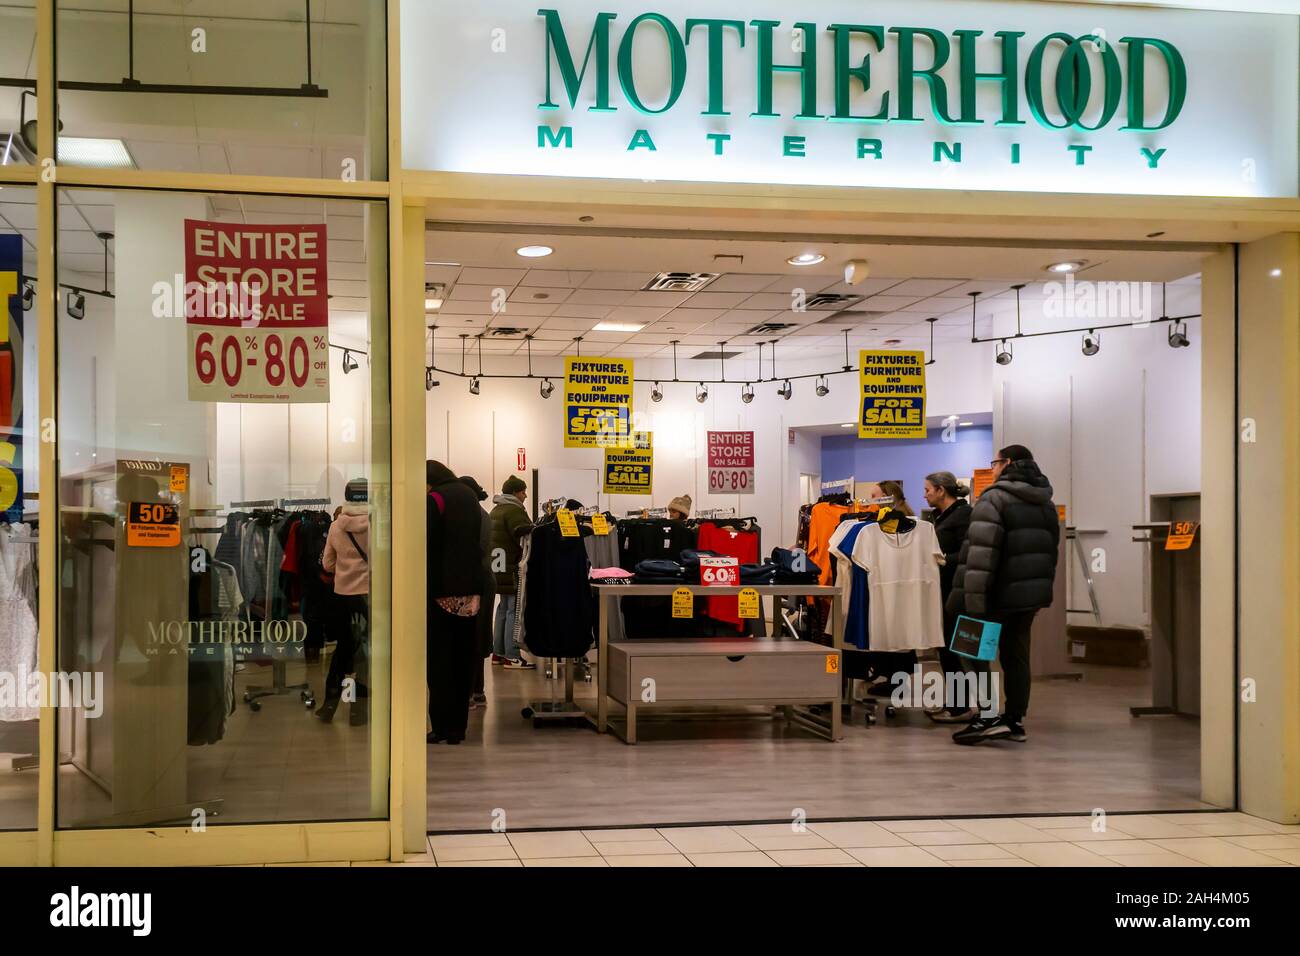 The Motherhood Maternity store announces its closing sales in the Queens Center Mall in the borough of Queens in New York on so-called Super Saturday. the Saturday prior to Christmas, December 21, 2019. Motherhood Maternity is a brand of Destination Maternity which filed for bankruptcy protection earlier this year and is closing 183 stores. (© Richard B. Levine) Stock Photo